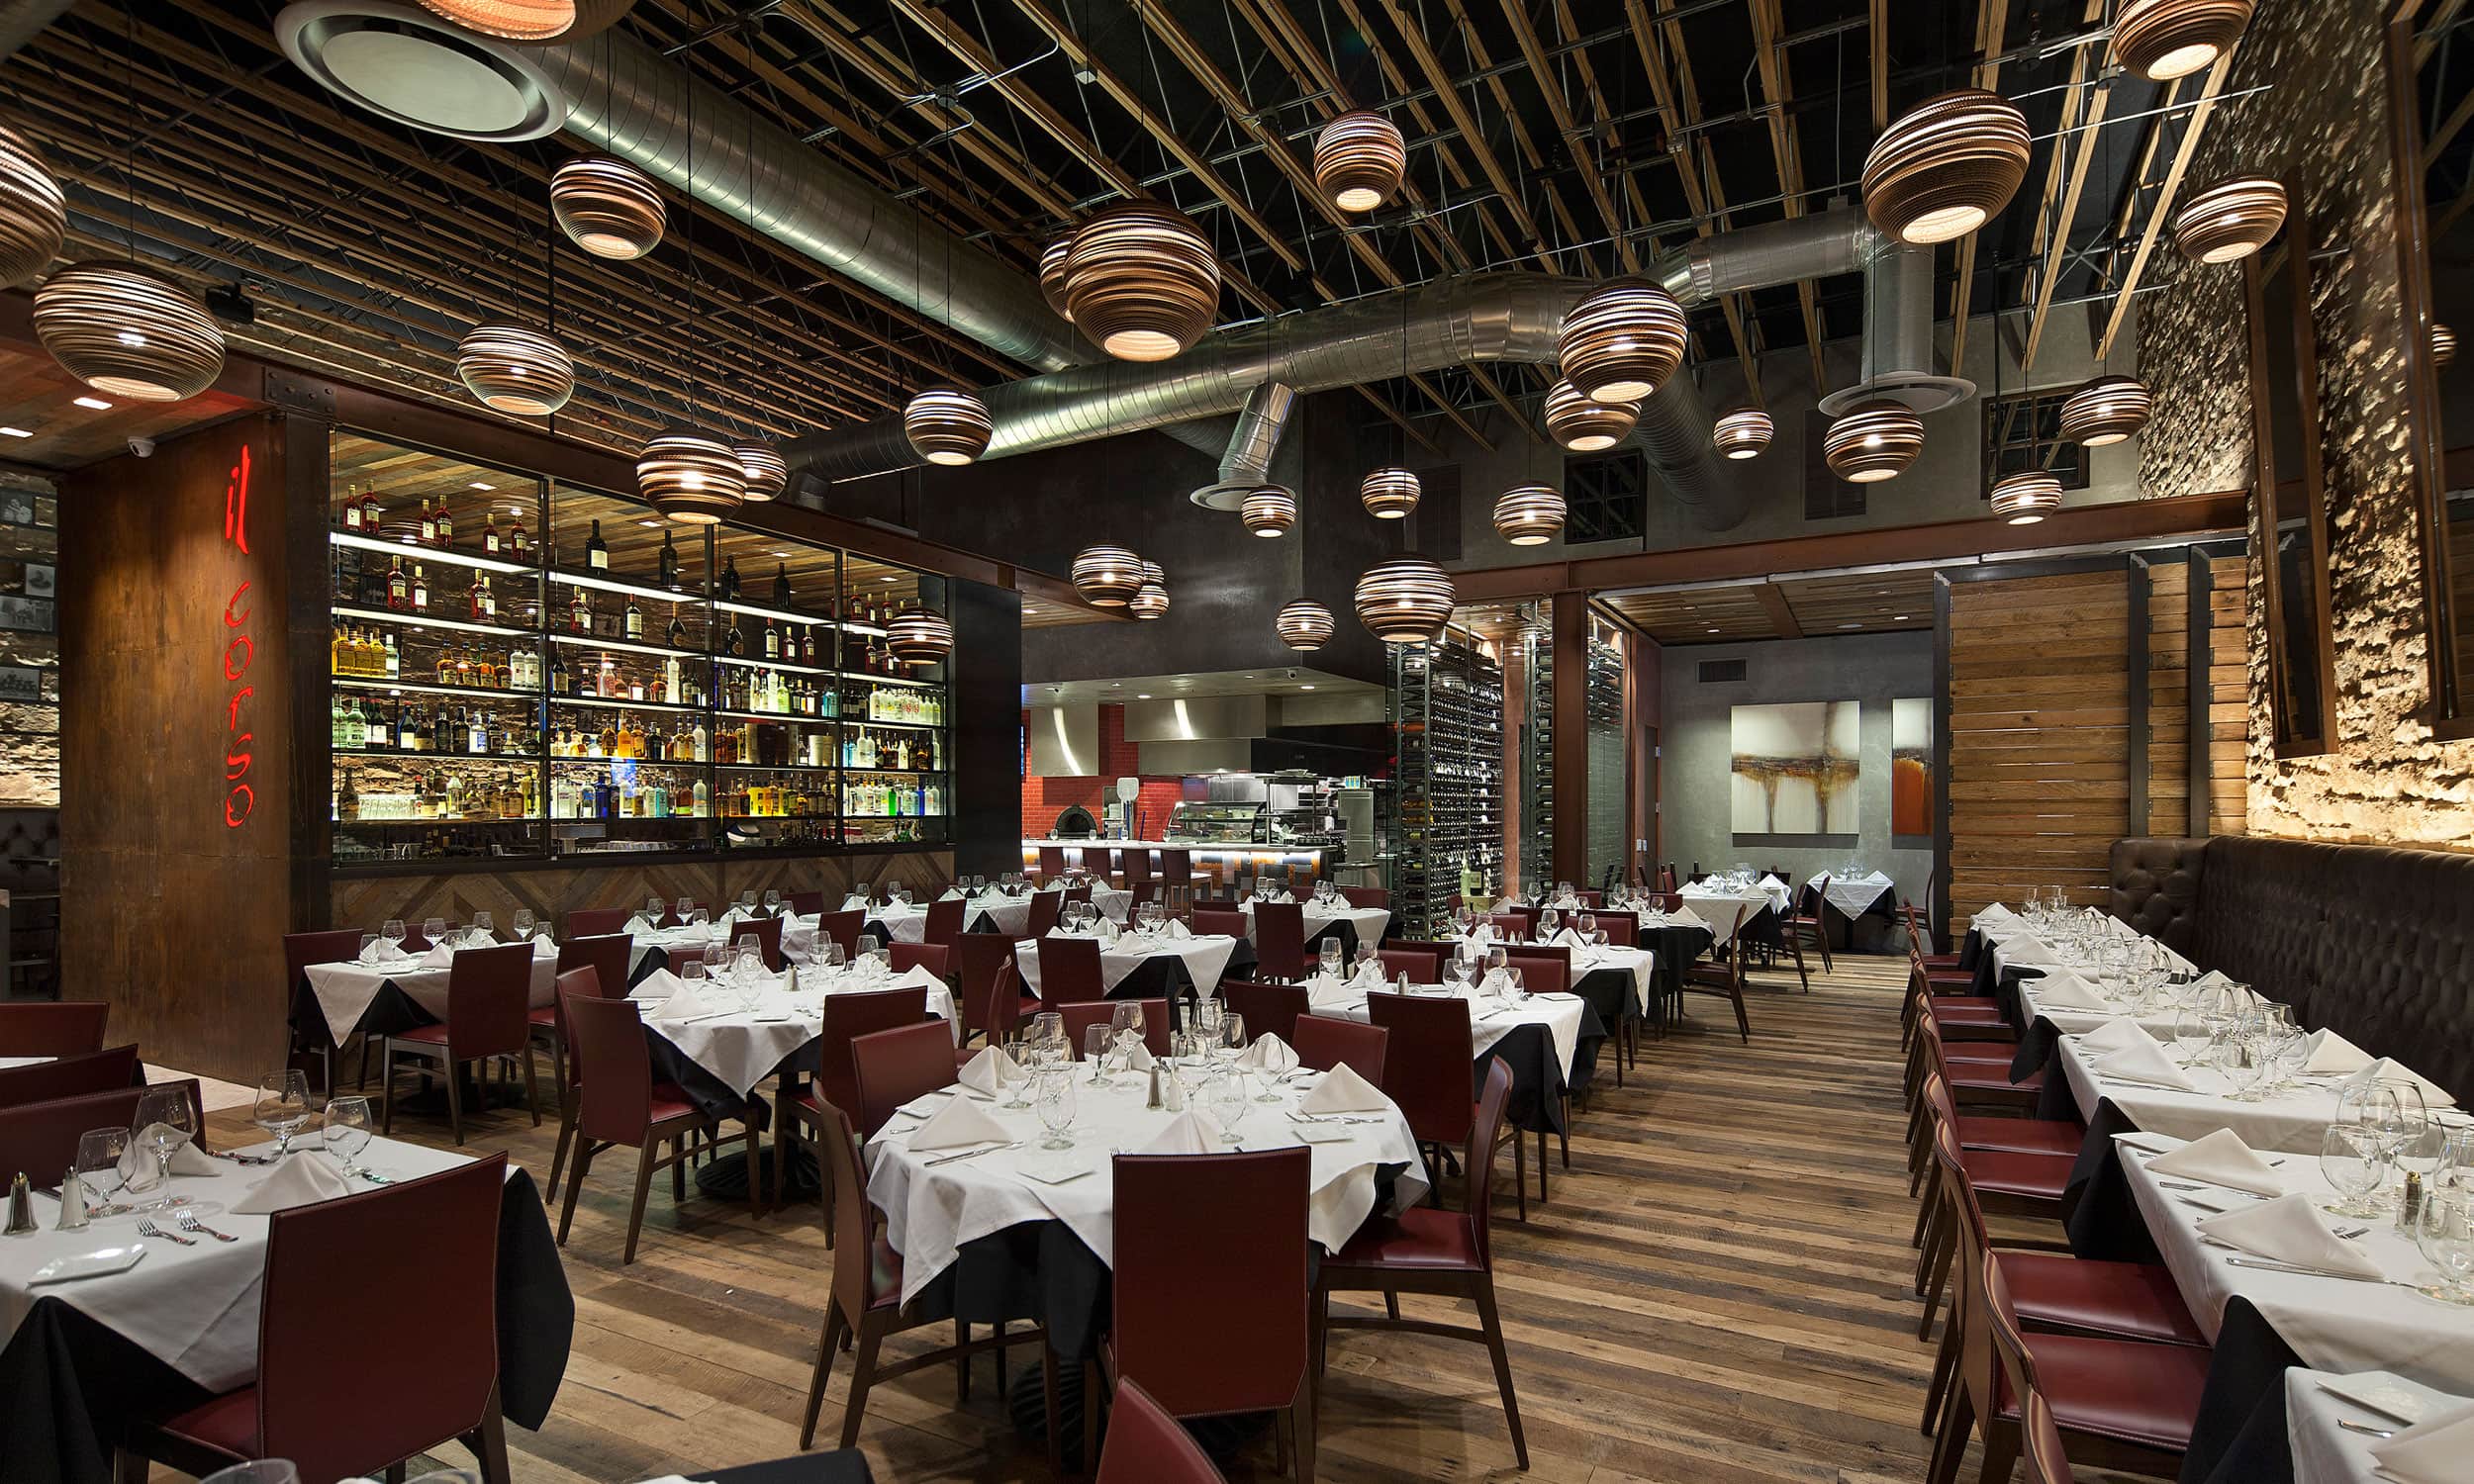 An upscale restaurants main dining room and its lighting setup